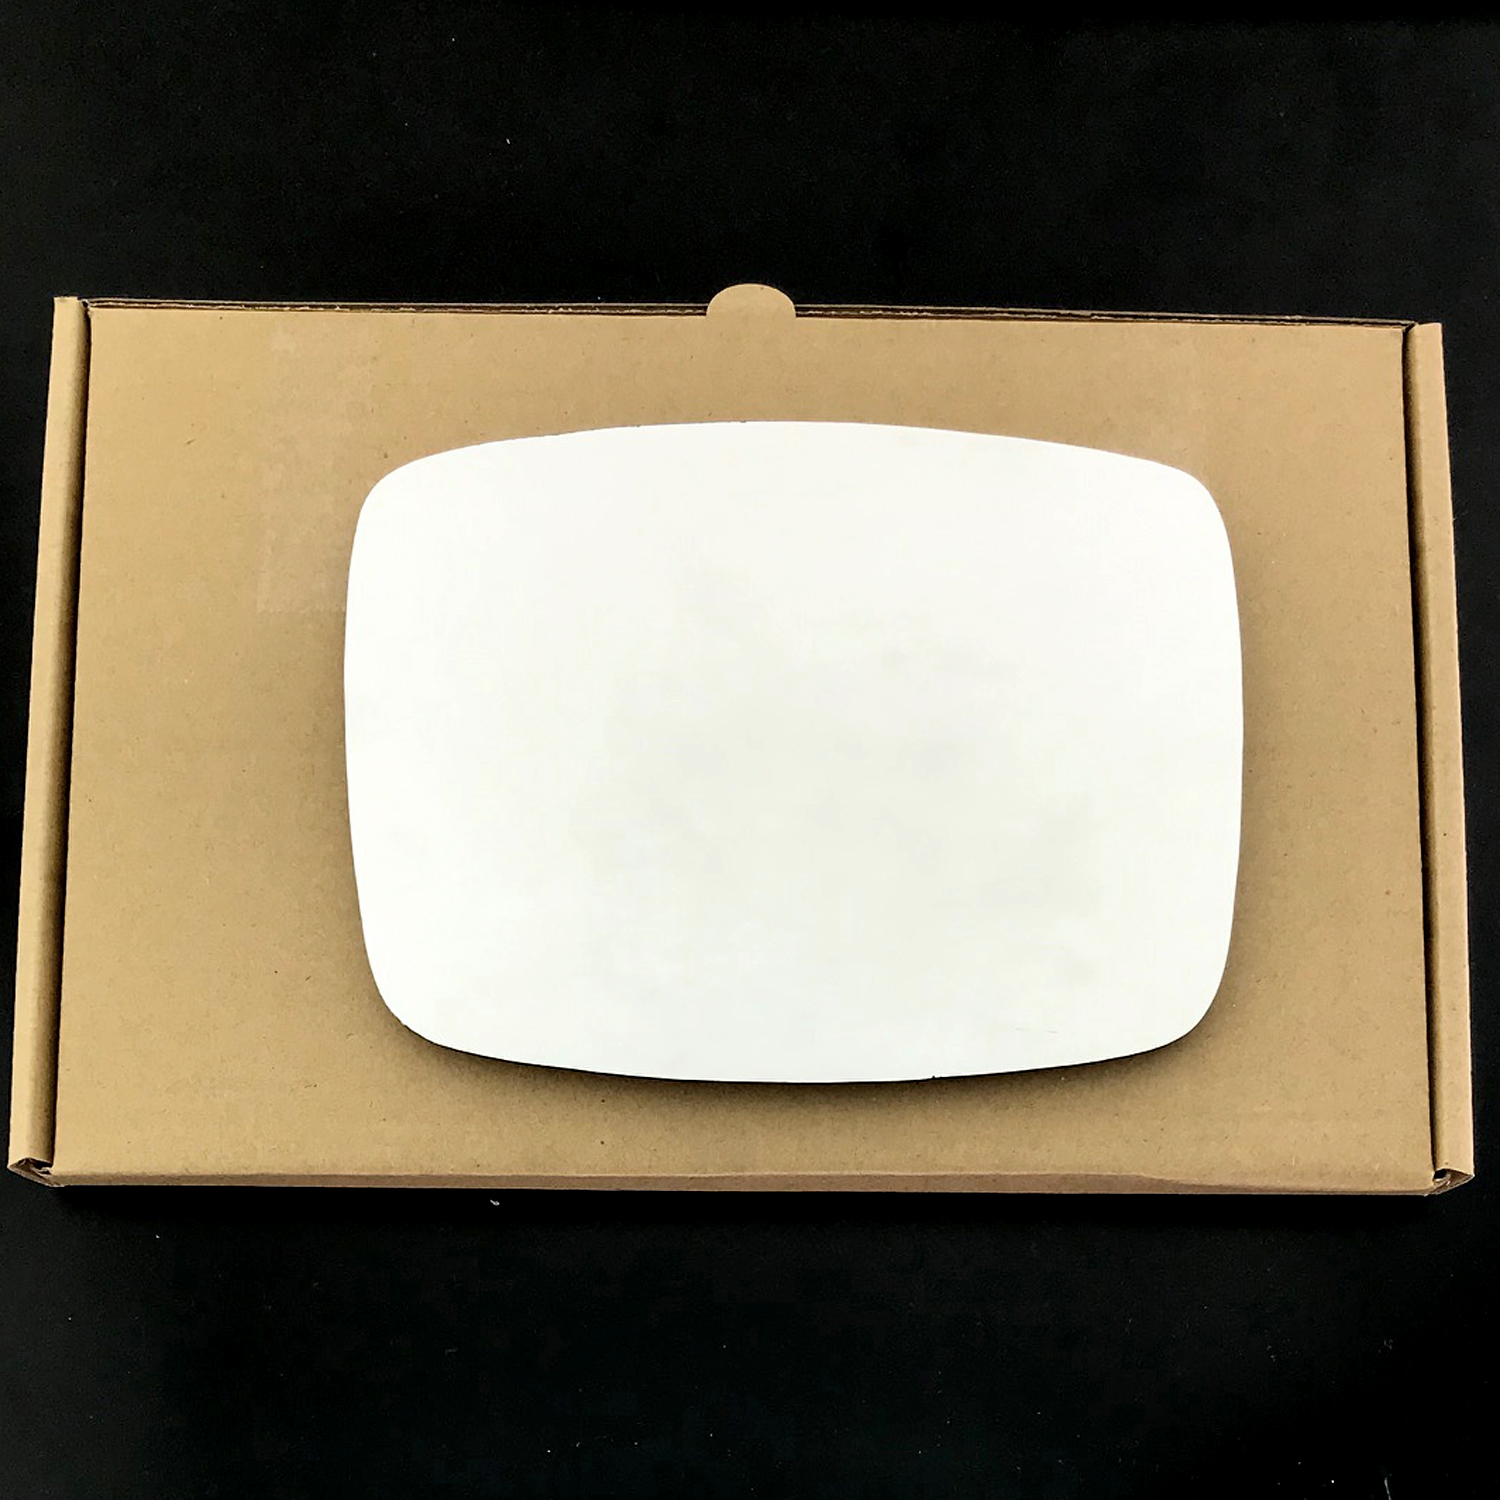 Mercedes Vito Wing Mirror Glass RIGHT HAND ( UK Driver Side ) 1996 to 2003 – Convex Wing Mirror